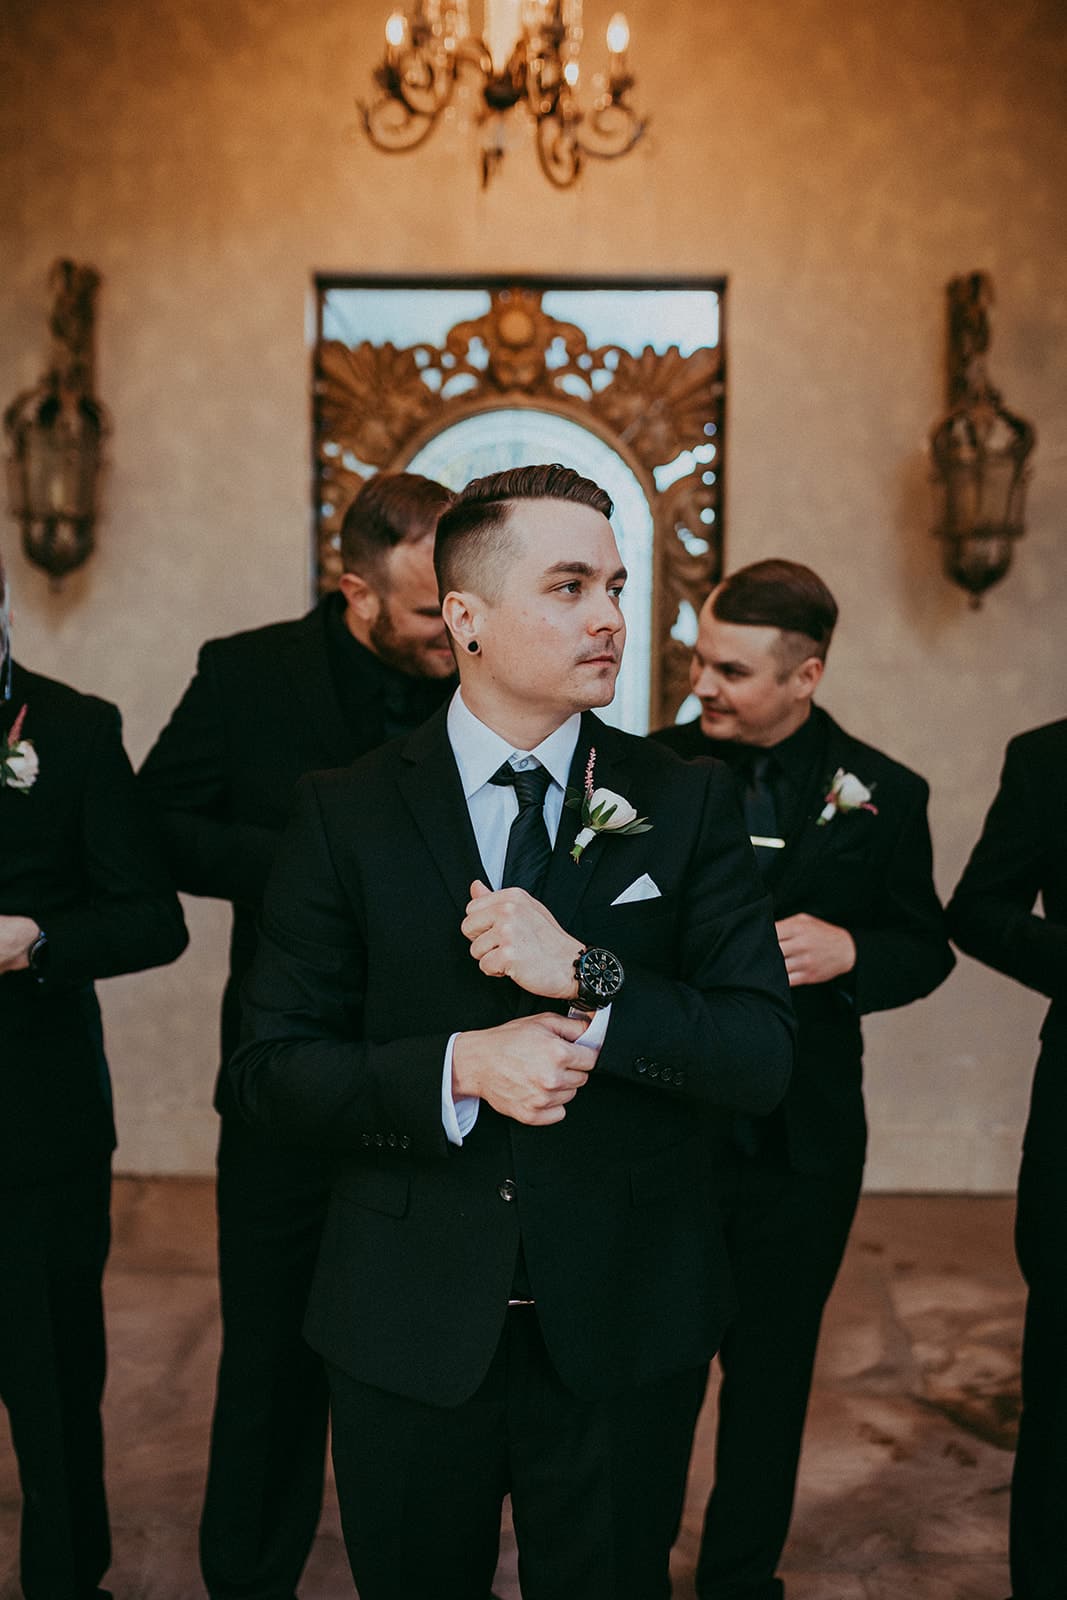 Groom standing in front of groomsmen wearing black suits against a modern art wall and chandelier